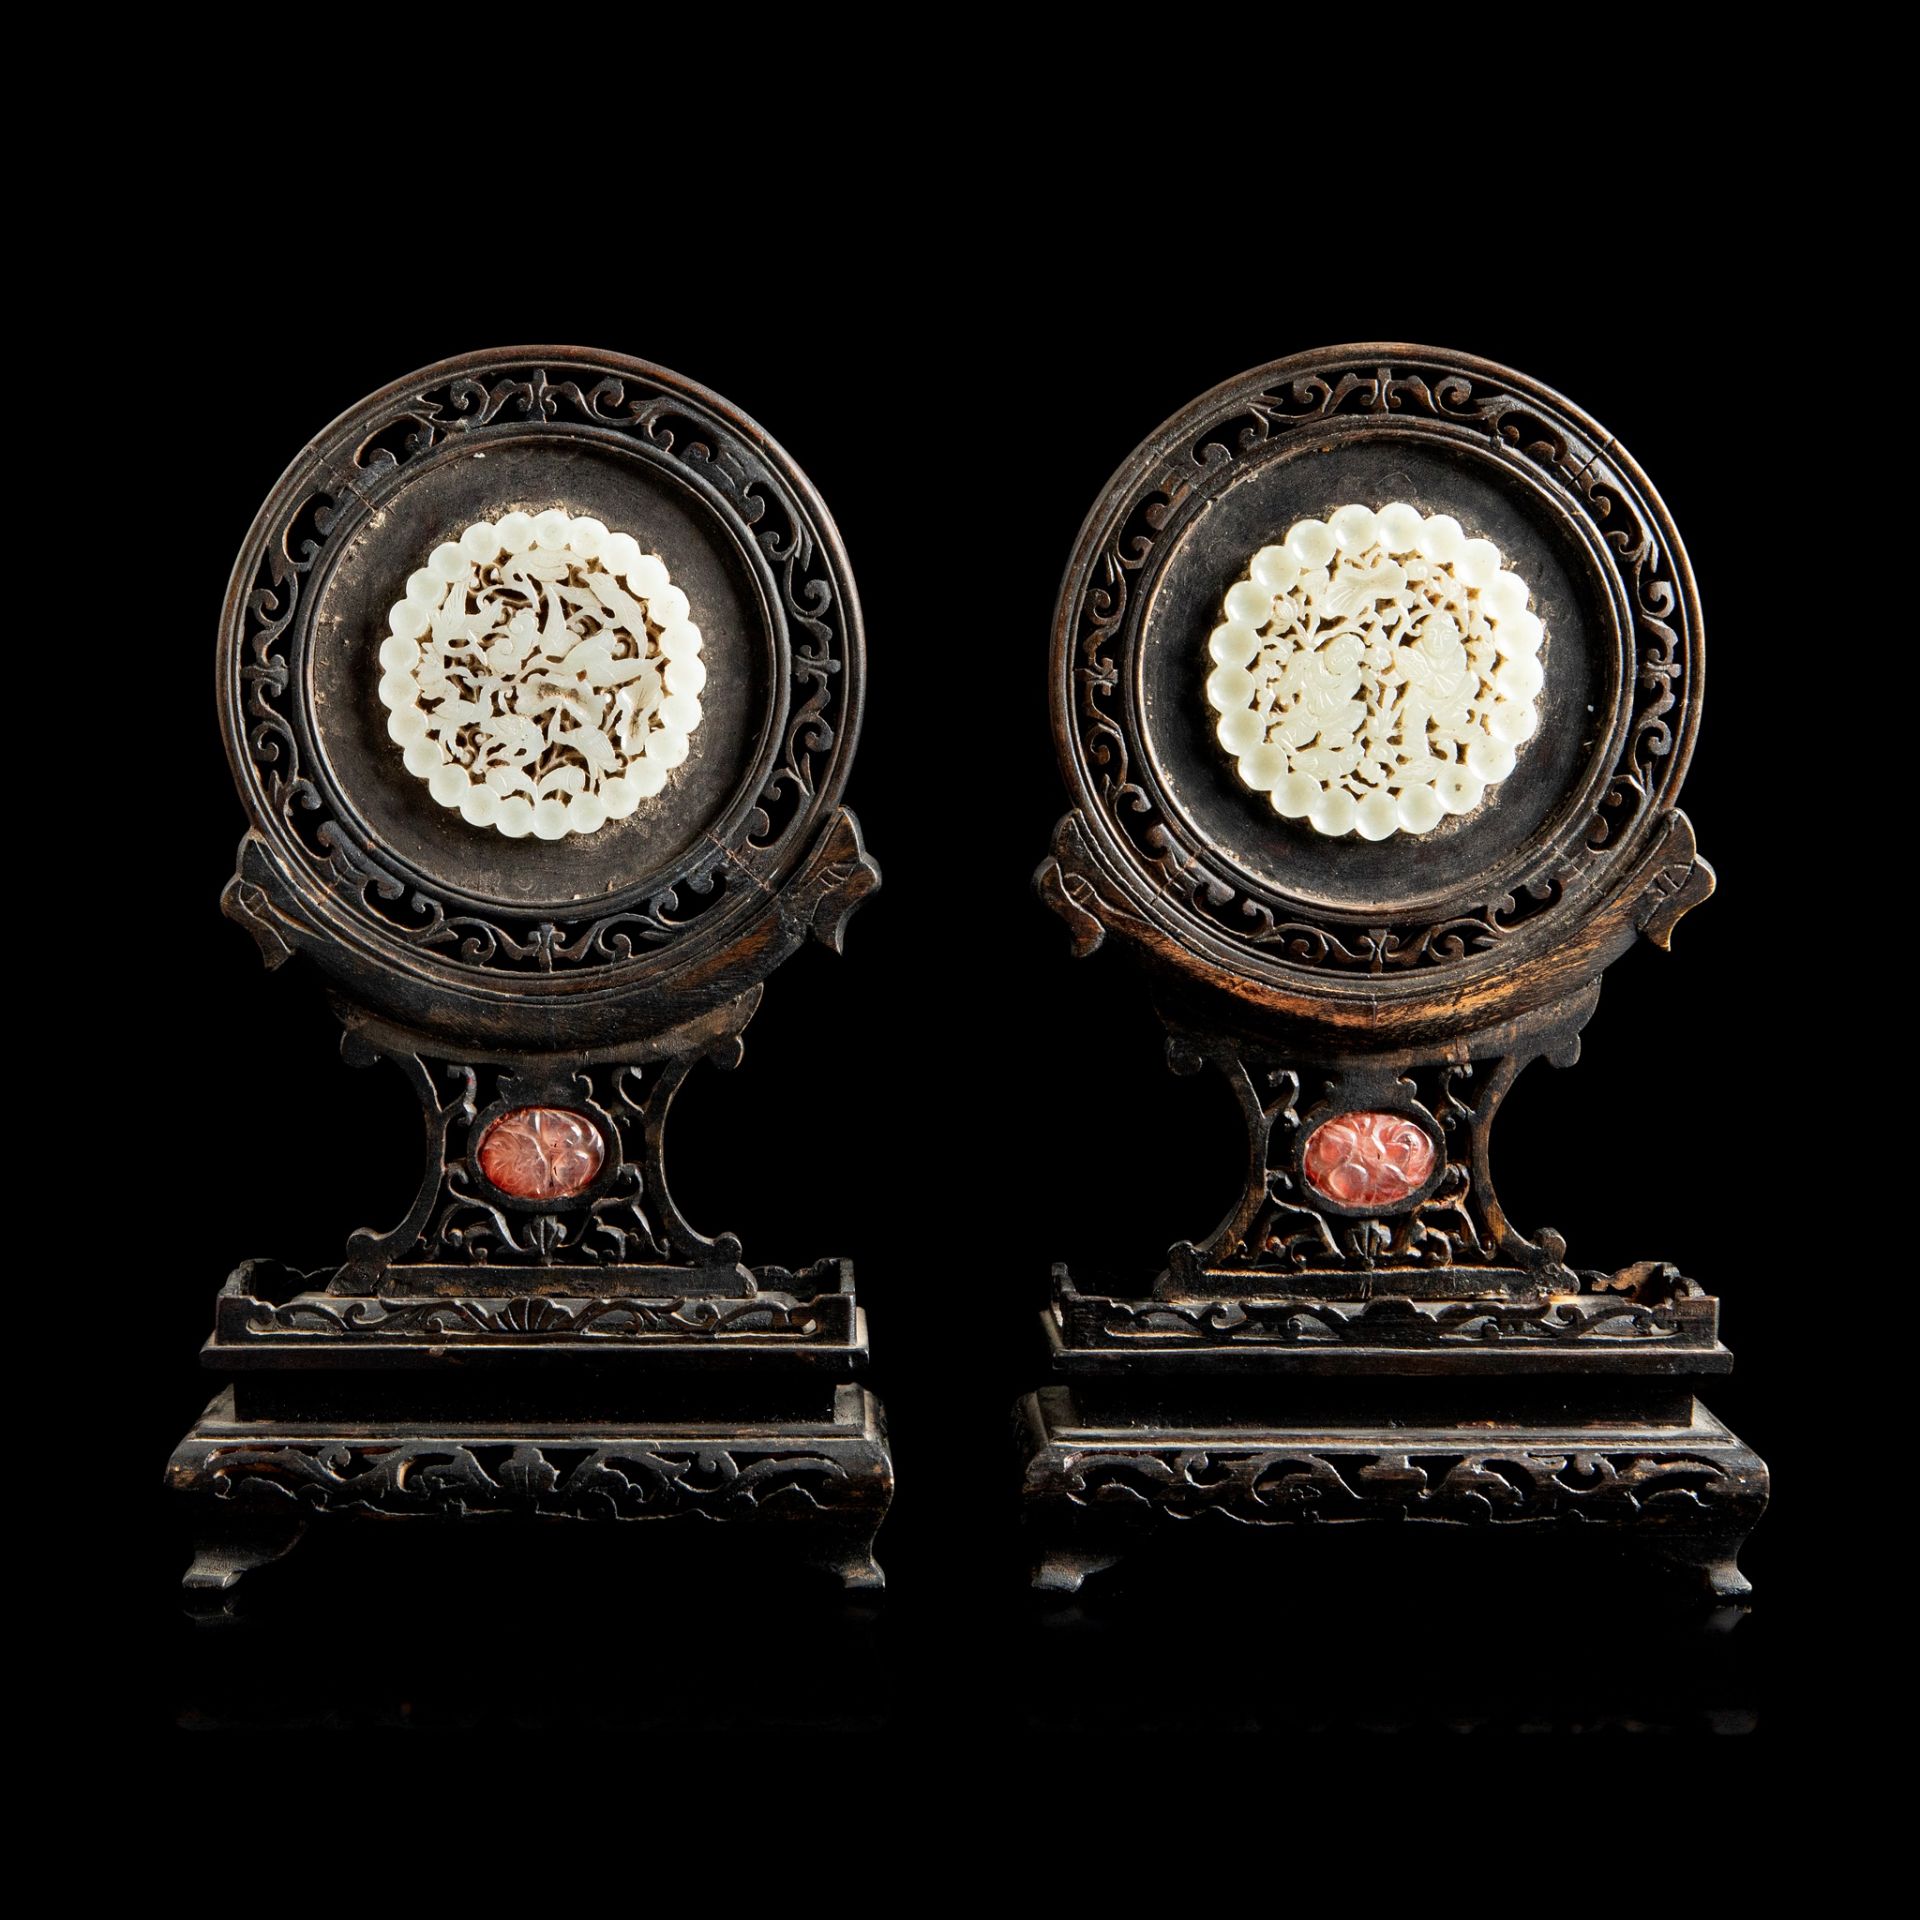 PAIR OF WHITE JADE PLAQUES QING DYNASTY, 19TH CENTURY